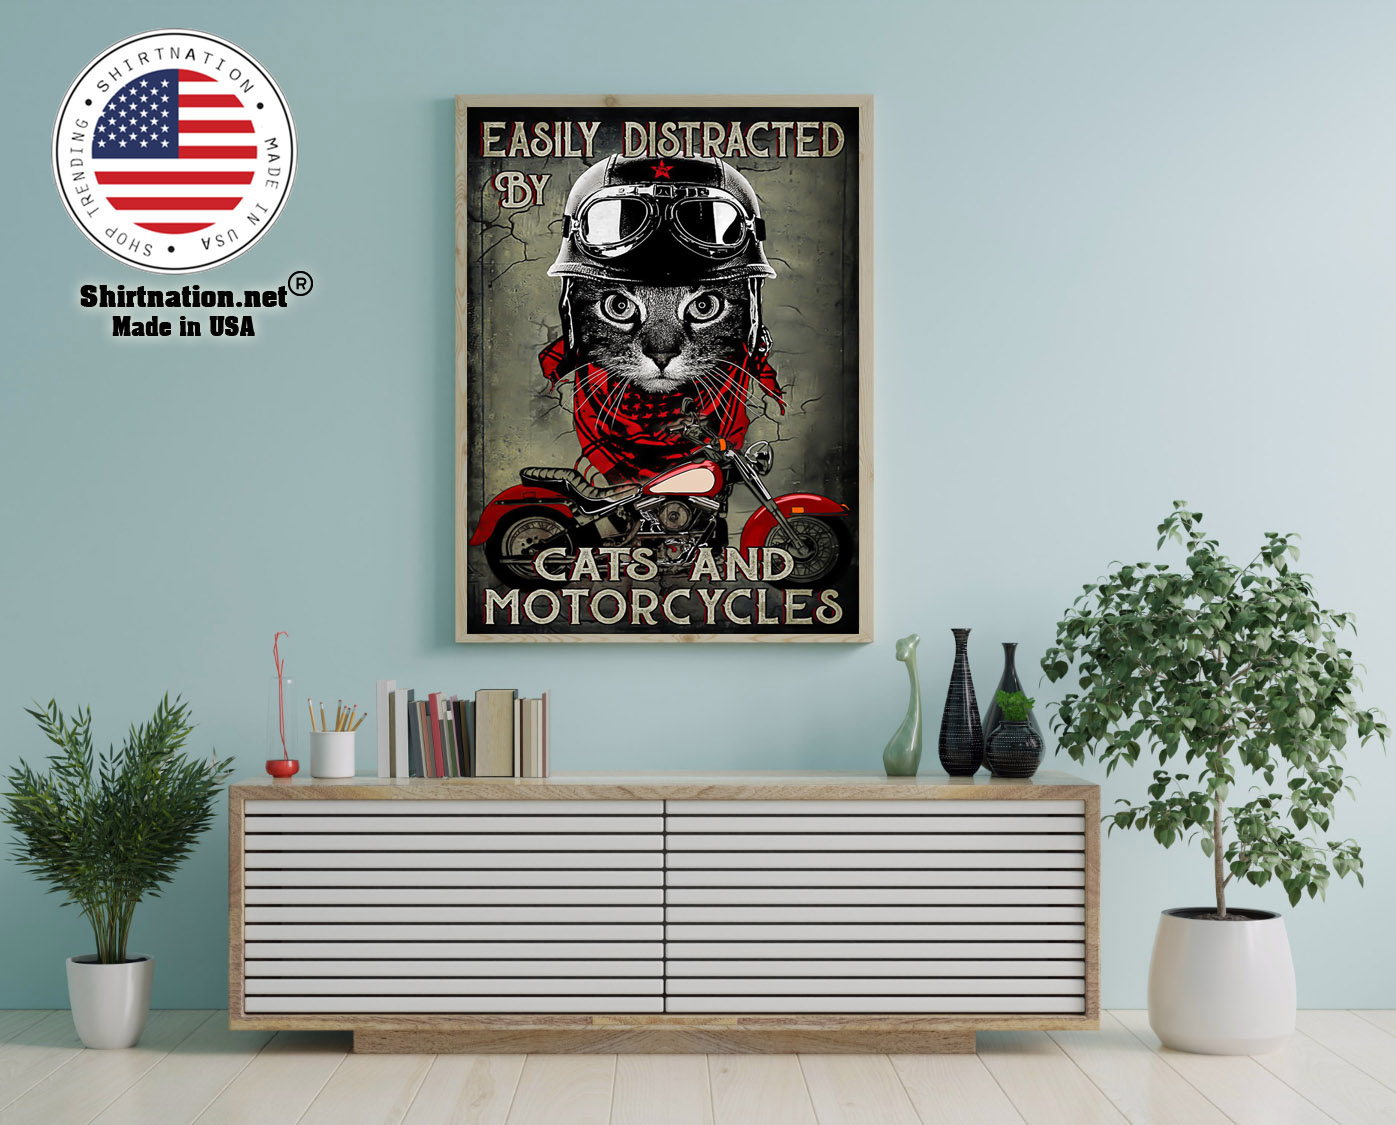 Easily distracted by cats and motorcycles poster 12